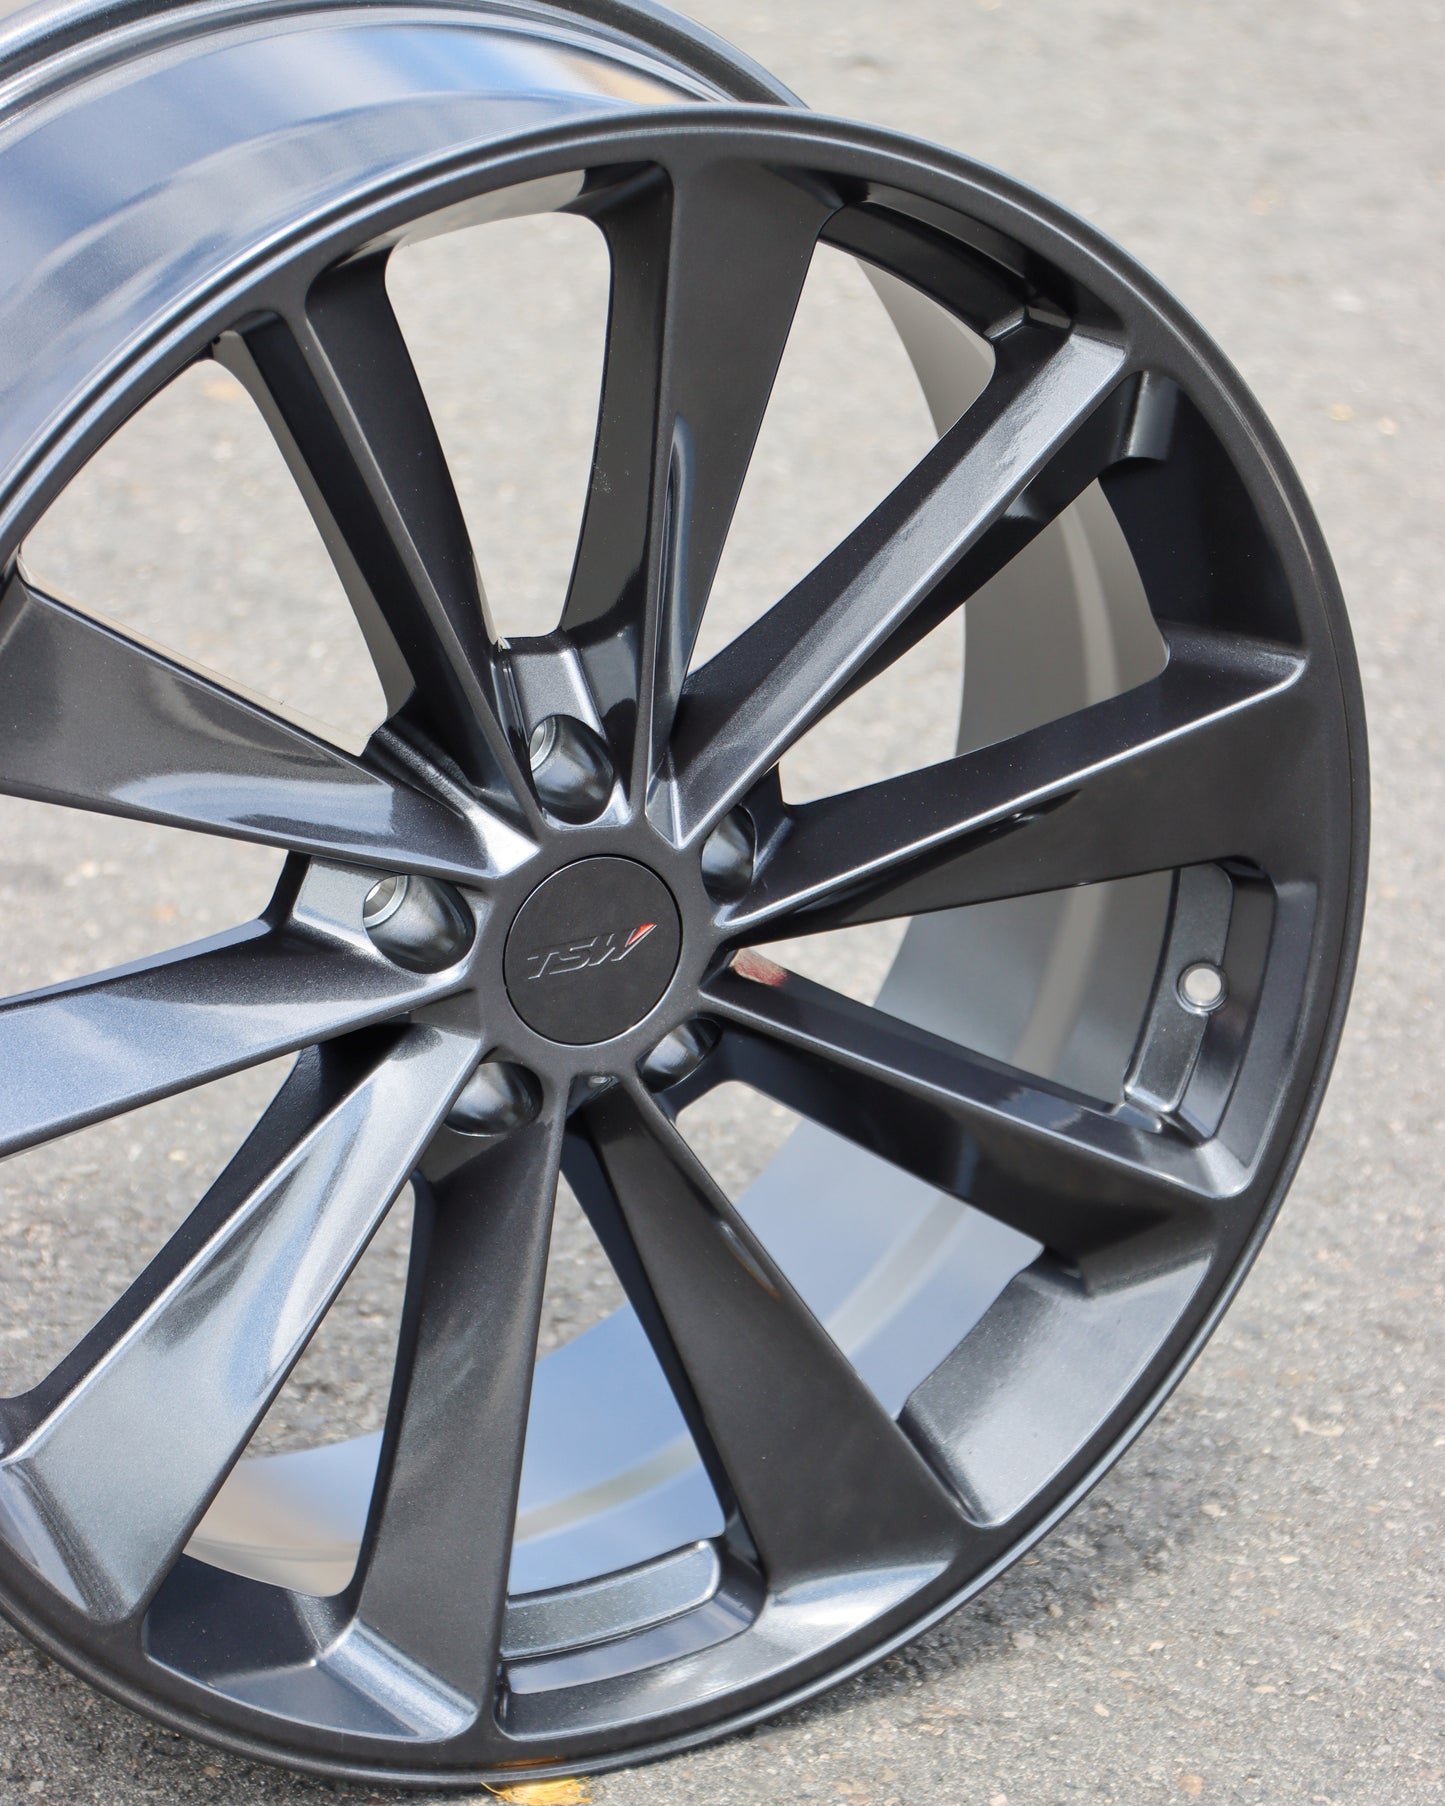 topside view of the TSW Aileron Wheel in a Gunmetal gray finish.